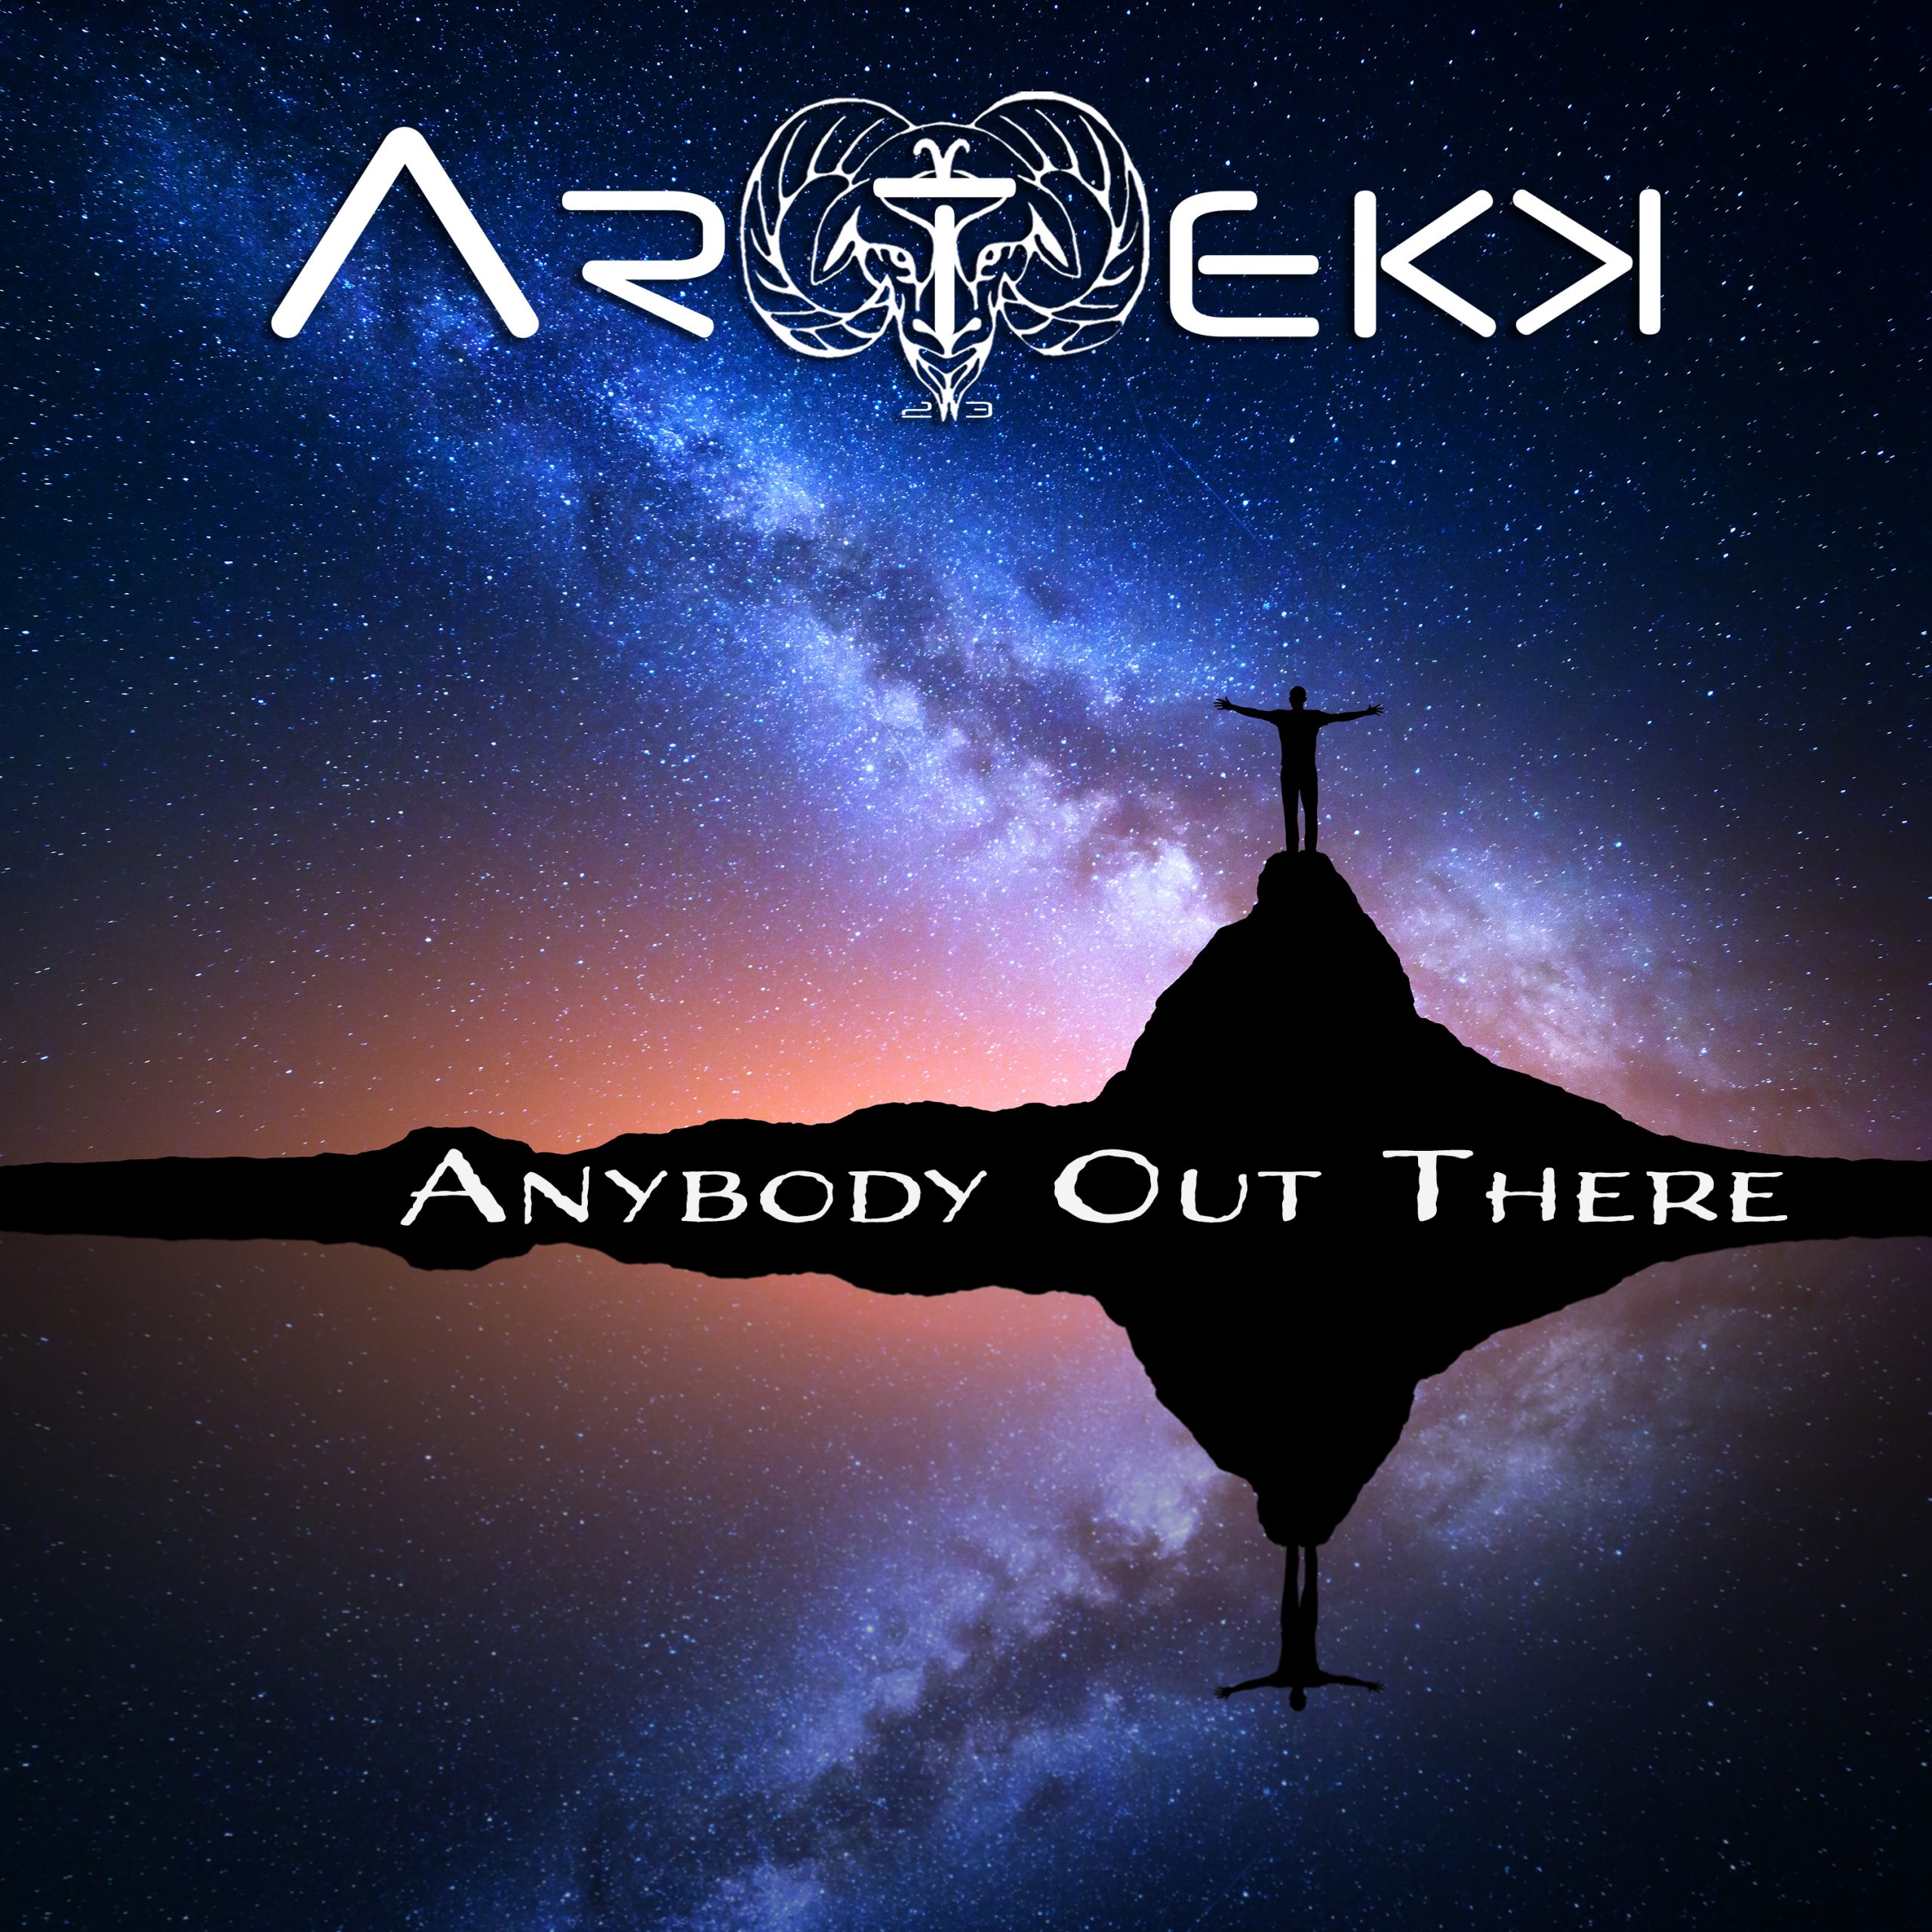 "Anybody Out There" New Studio Release by ARTEKK